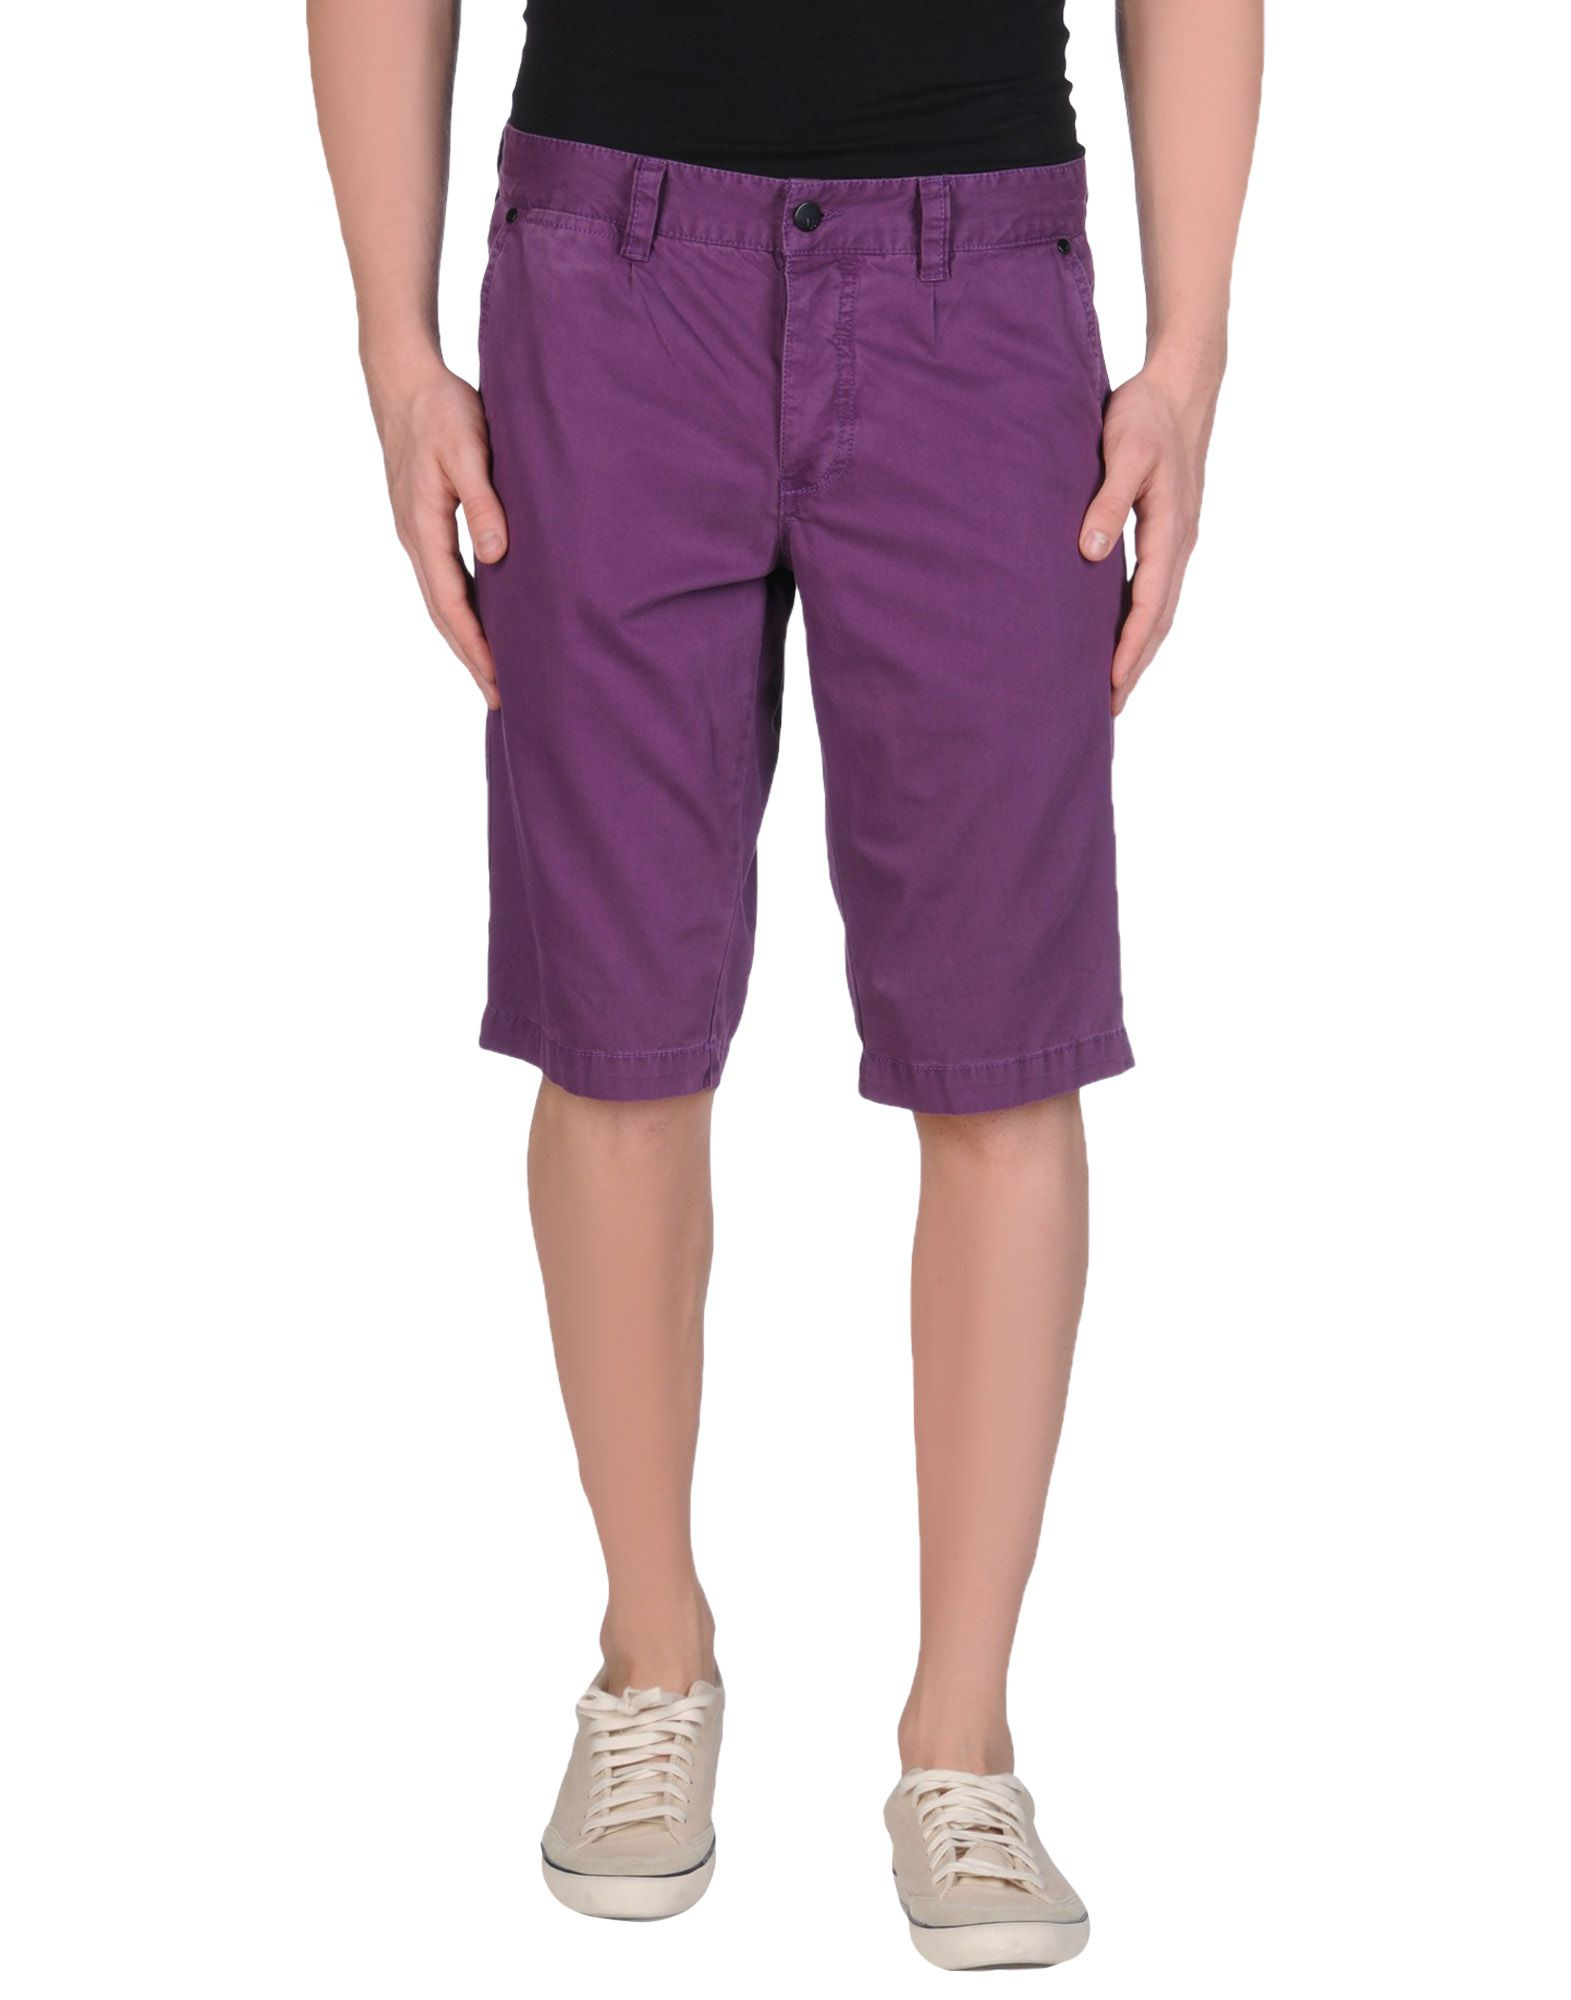 what to wear with lavender shorts for men